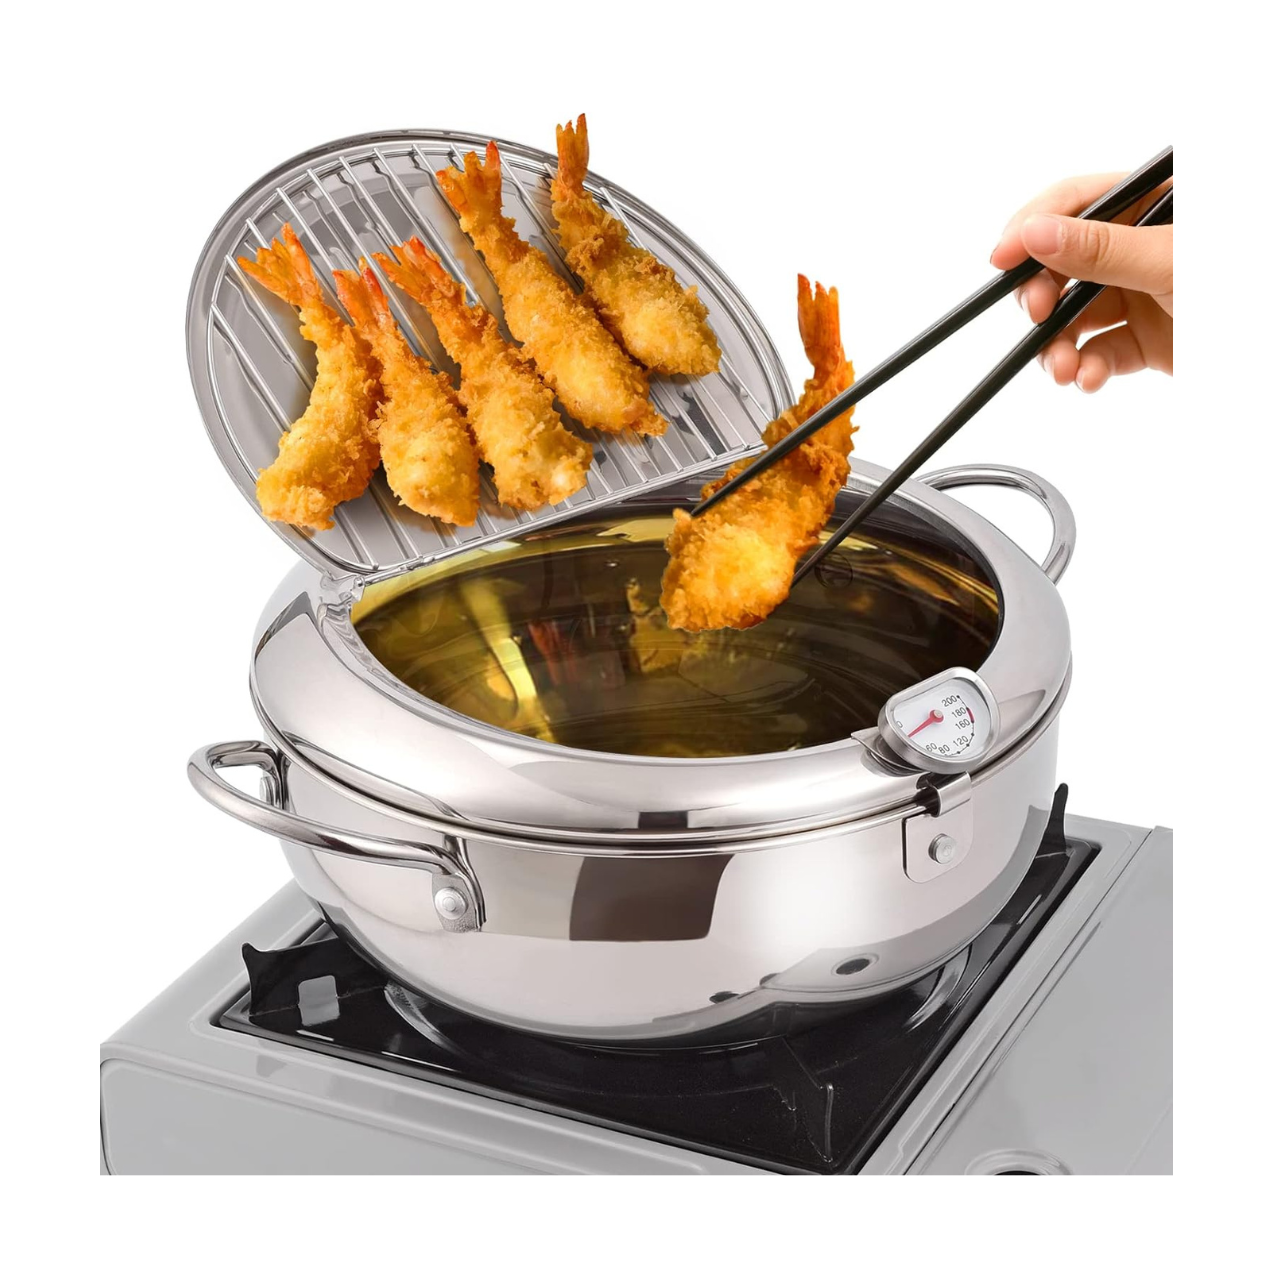 Stainless Steel 9" Deep Fryer Pot w/ Thermometer